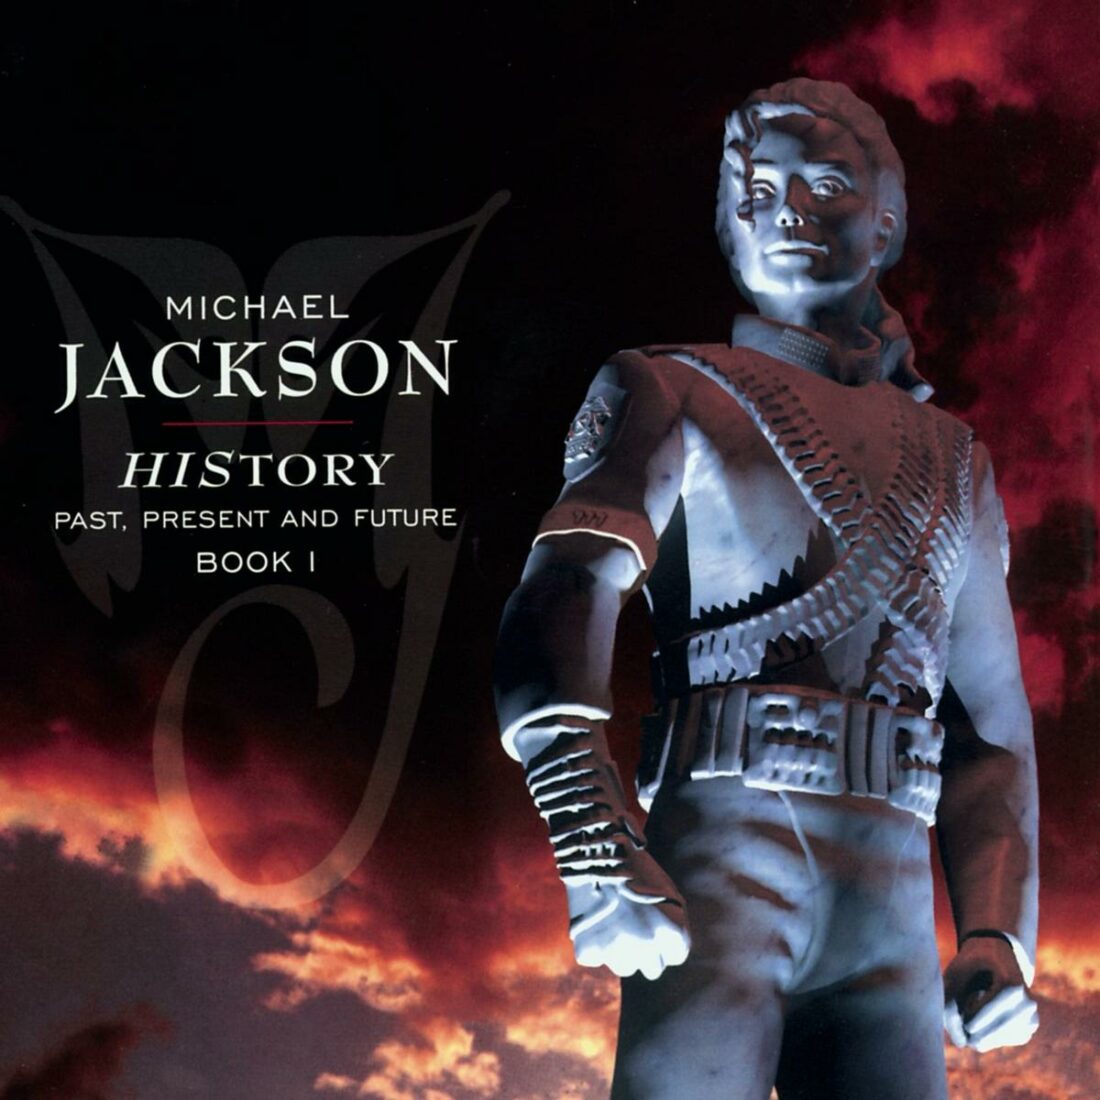 Michael Jackson, HIStory: Past, Present and Future, Book I. (From: Amazon)